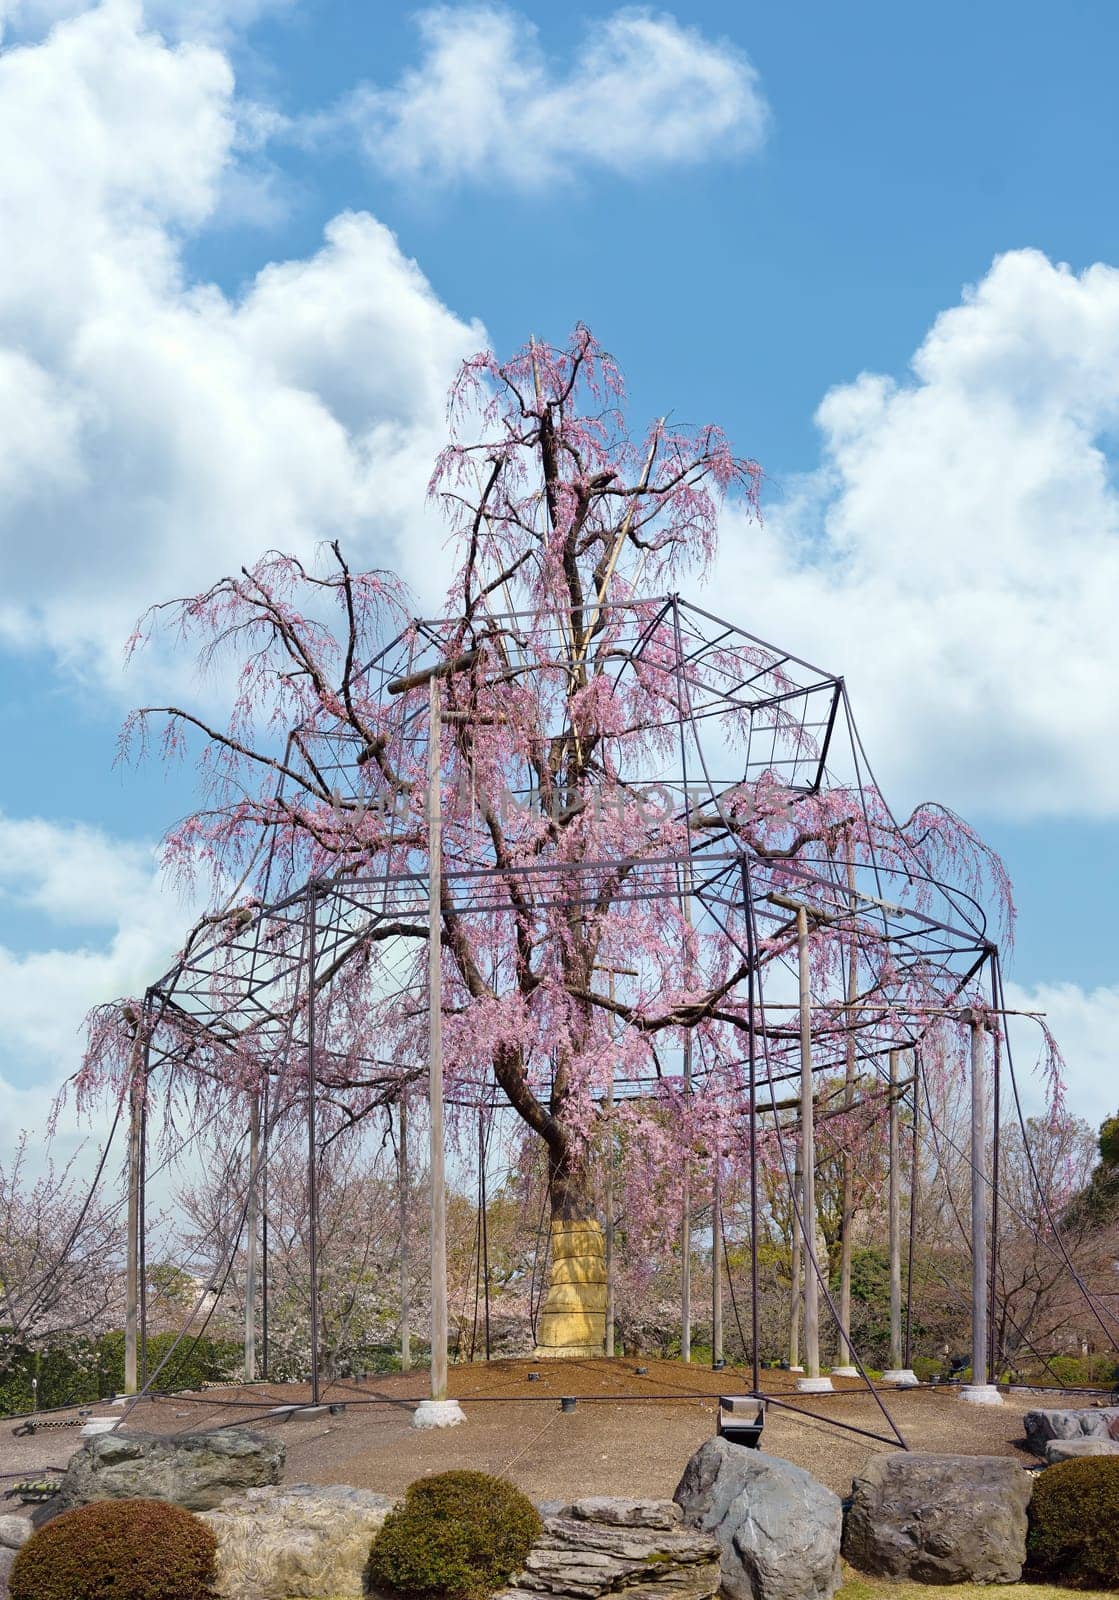 kyoto, japan - march 25 2023: A century-old weeping cherry tree with pink flowers on its long drooping branches supported by a frame formed by tall wooden pillars in the garden of Toji temple in Kyoto